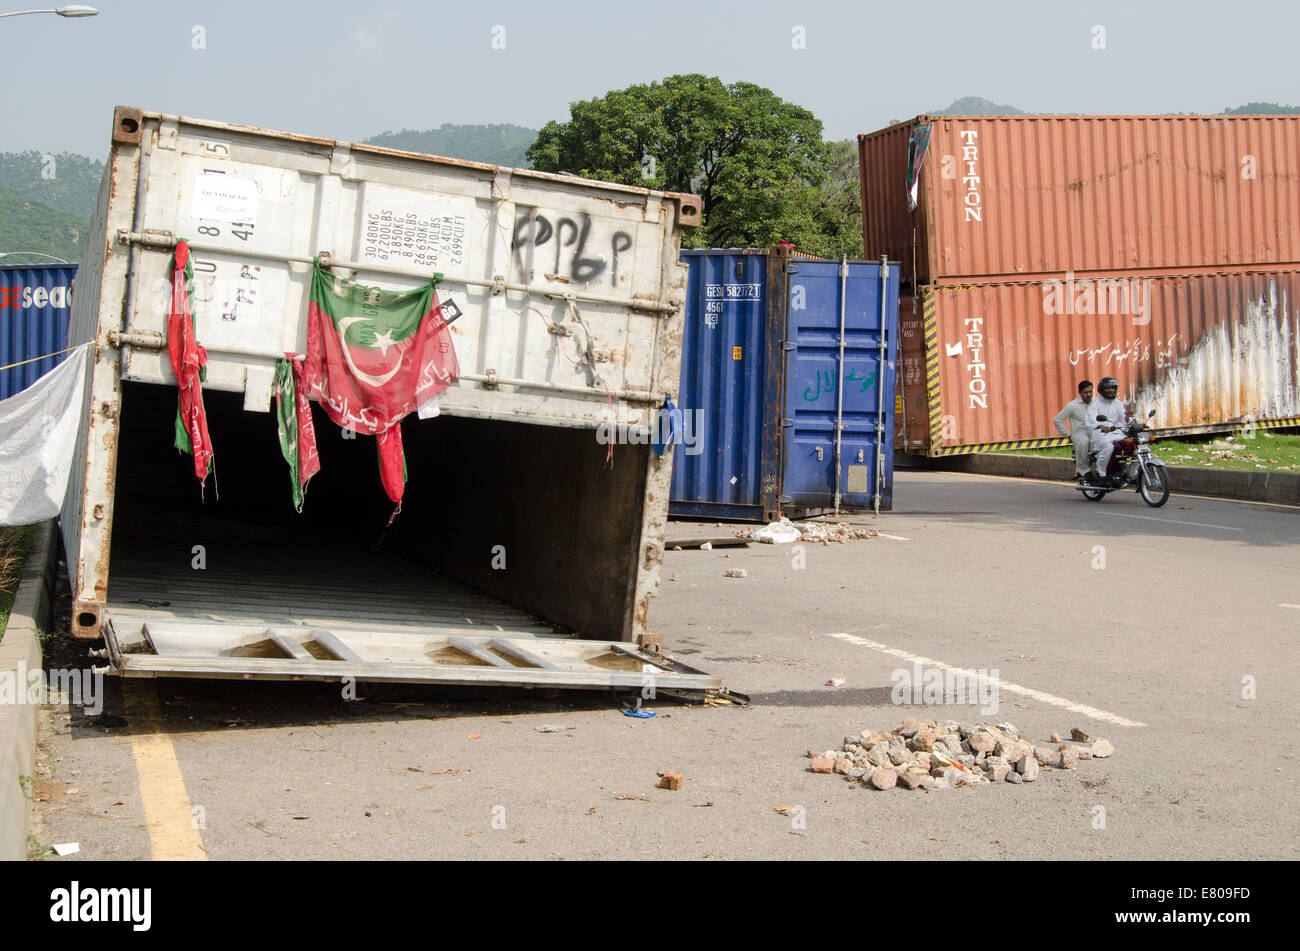 ISLAMABAD, PAKISTAN  SEPTEMBER 24, 2014:  Shipping containers being used by anti-government protesters in Islamabad. Stock Photo